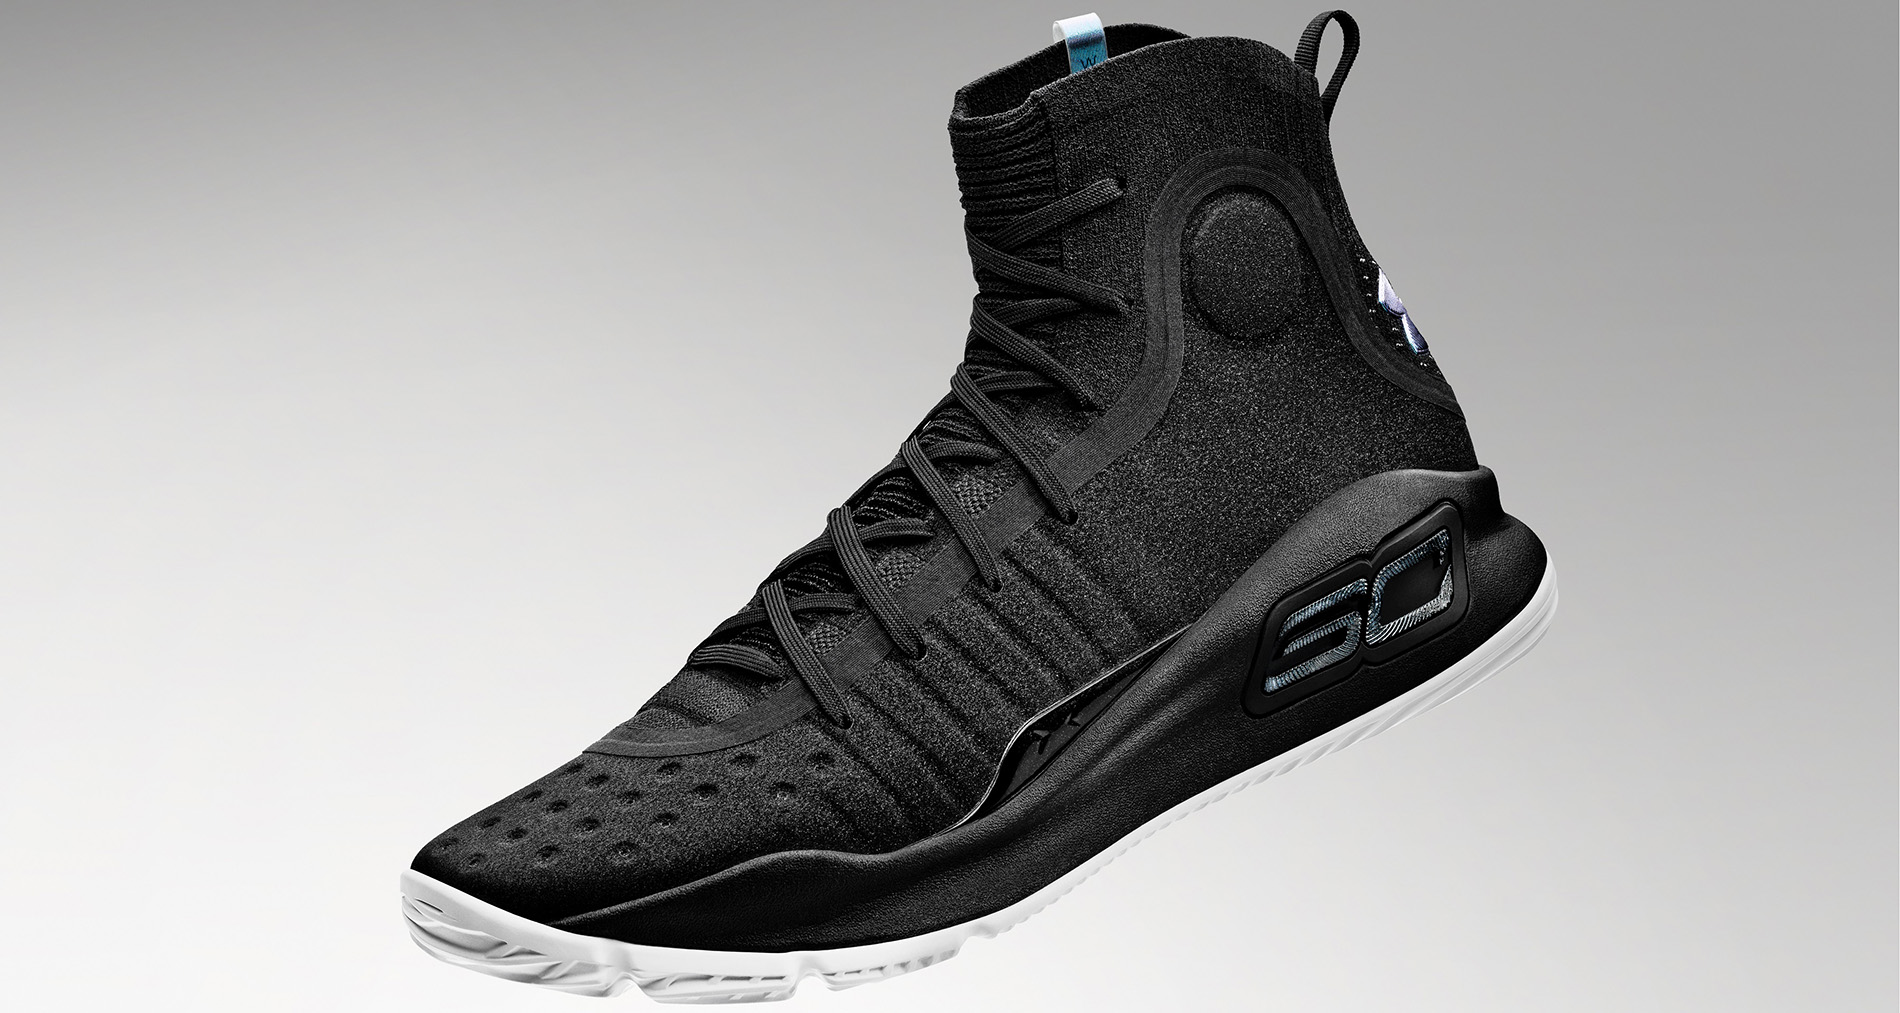 Under Armour Curry 4 "More Range"